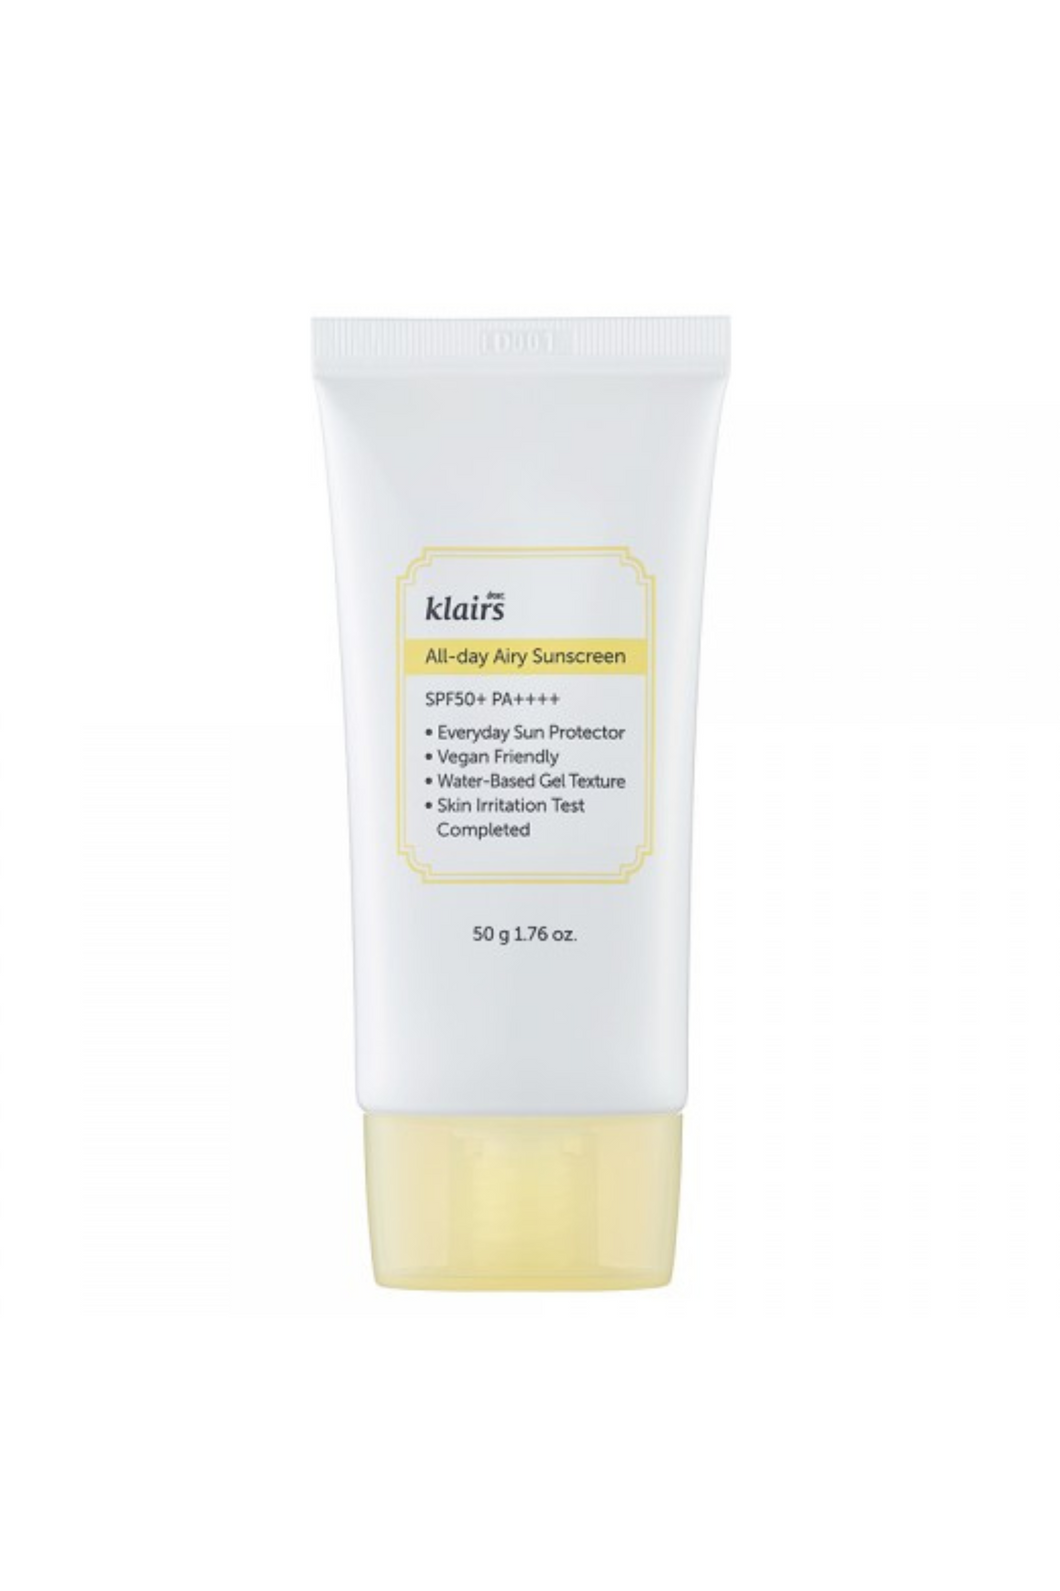 All-Day Airy Sunscreen SPF 50+